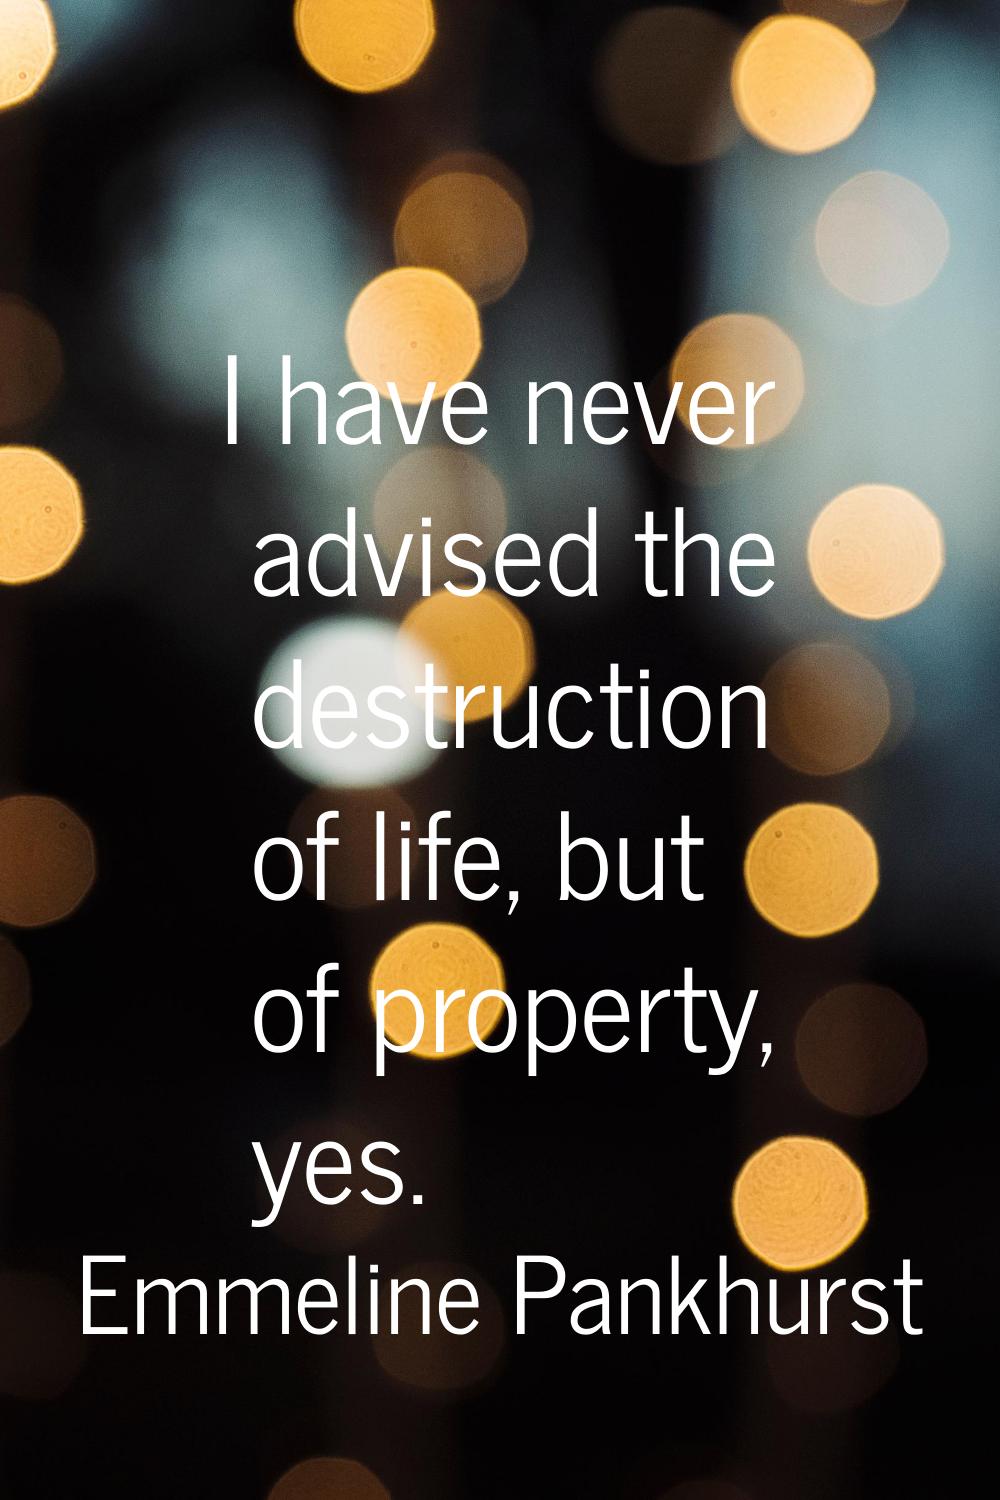 I have never advised the destruction of life, but of property, yes.